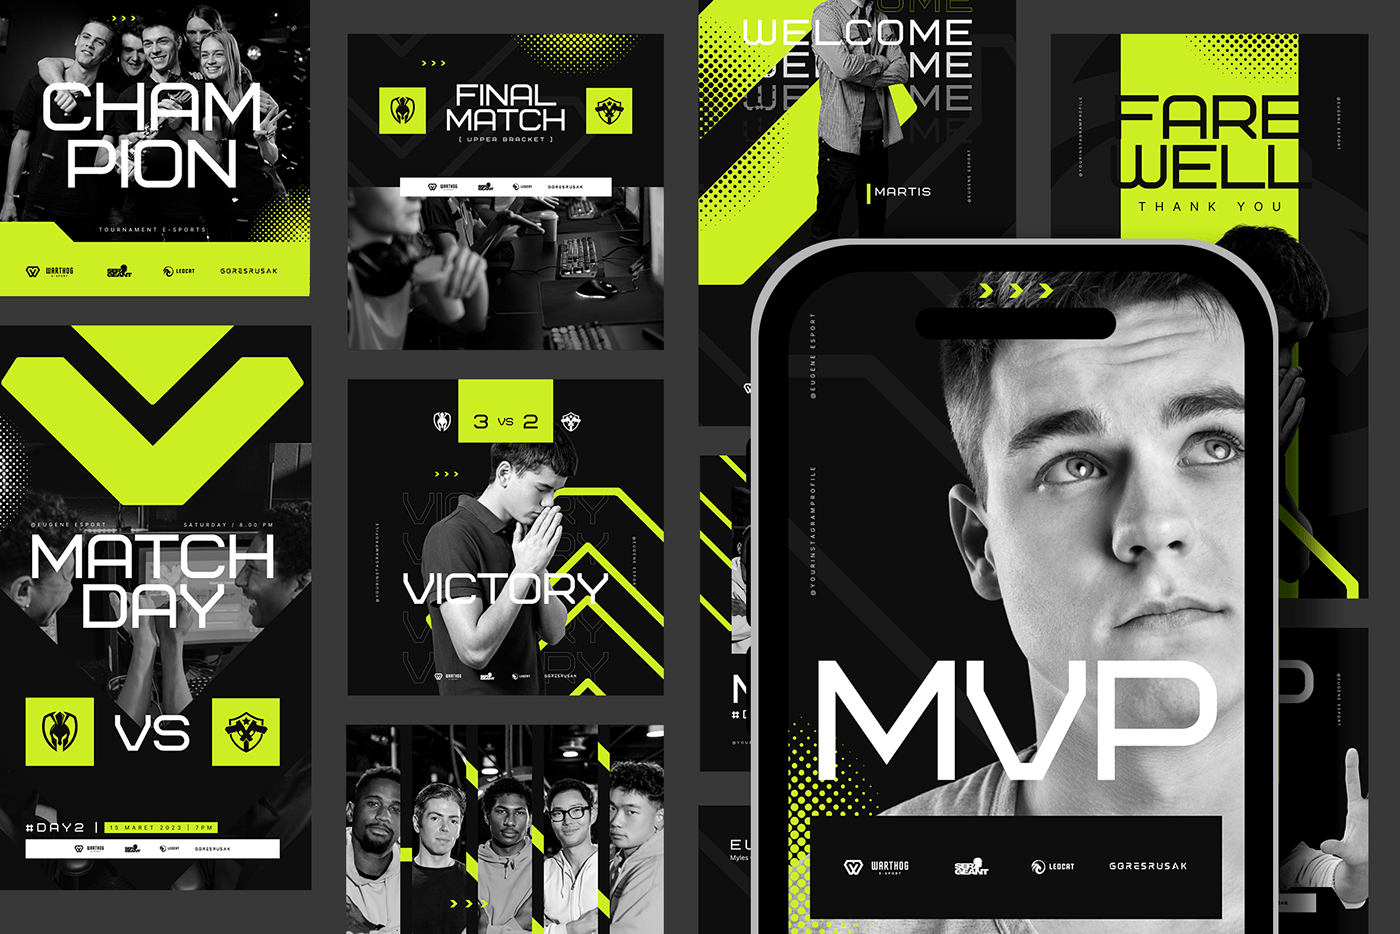 stream overlay Gaming Streamer Content Creator esports Twitch Overlay youtube Twitch instagram pack freebie